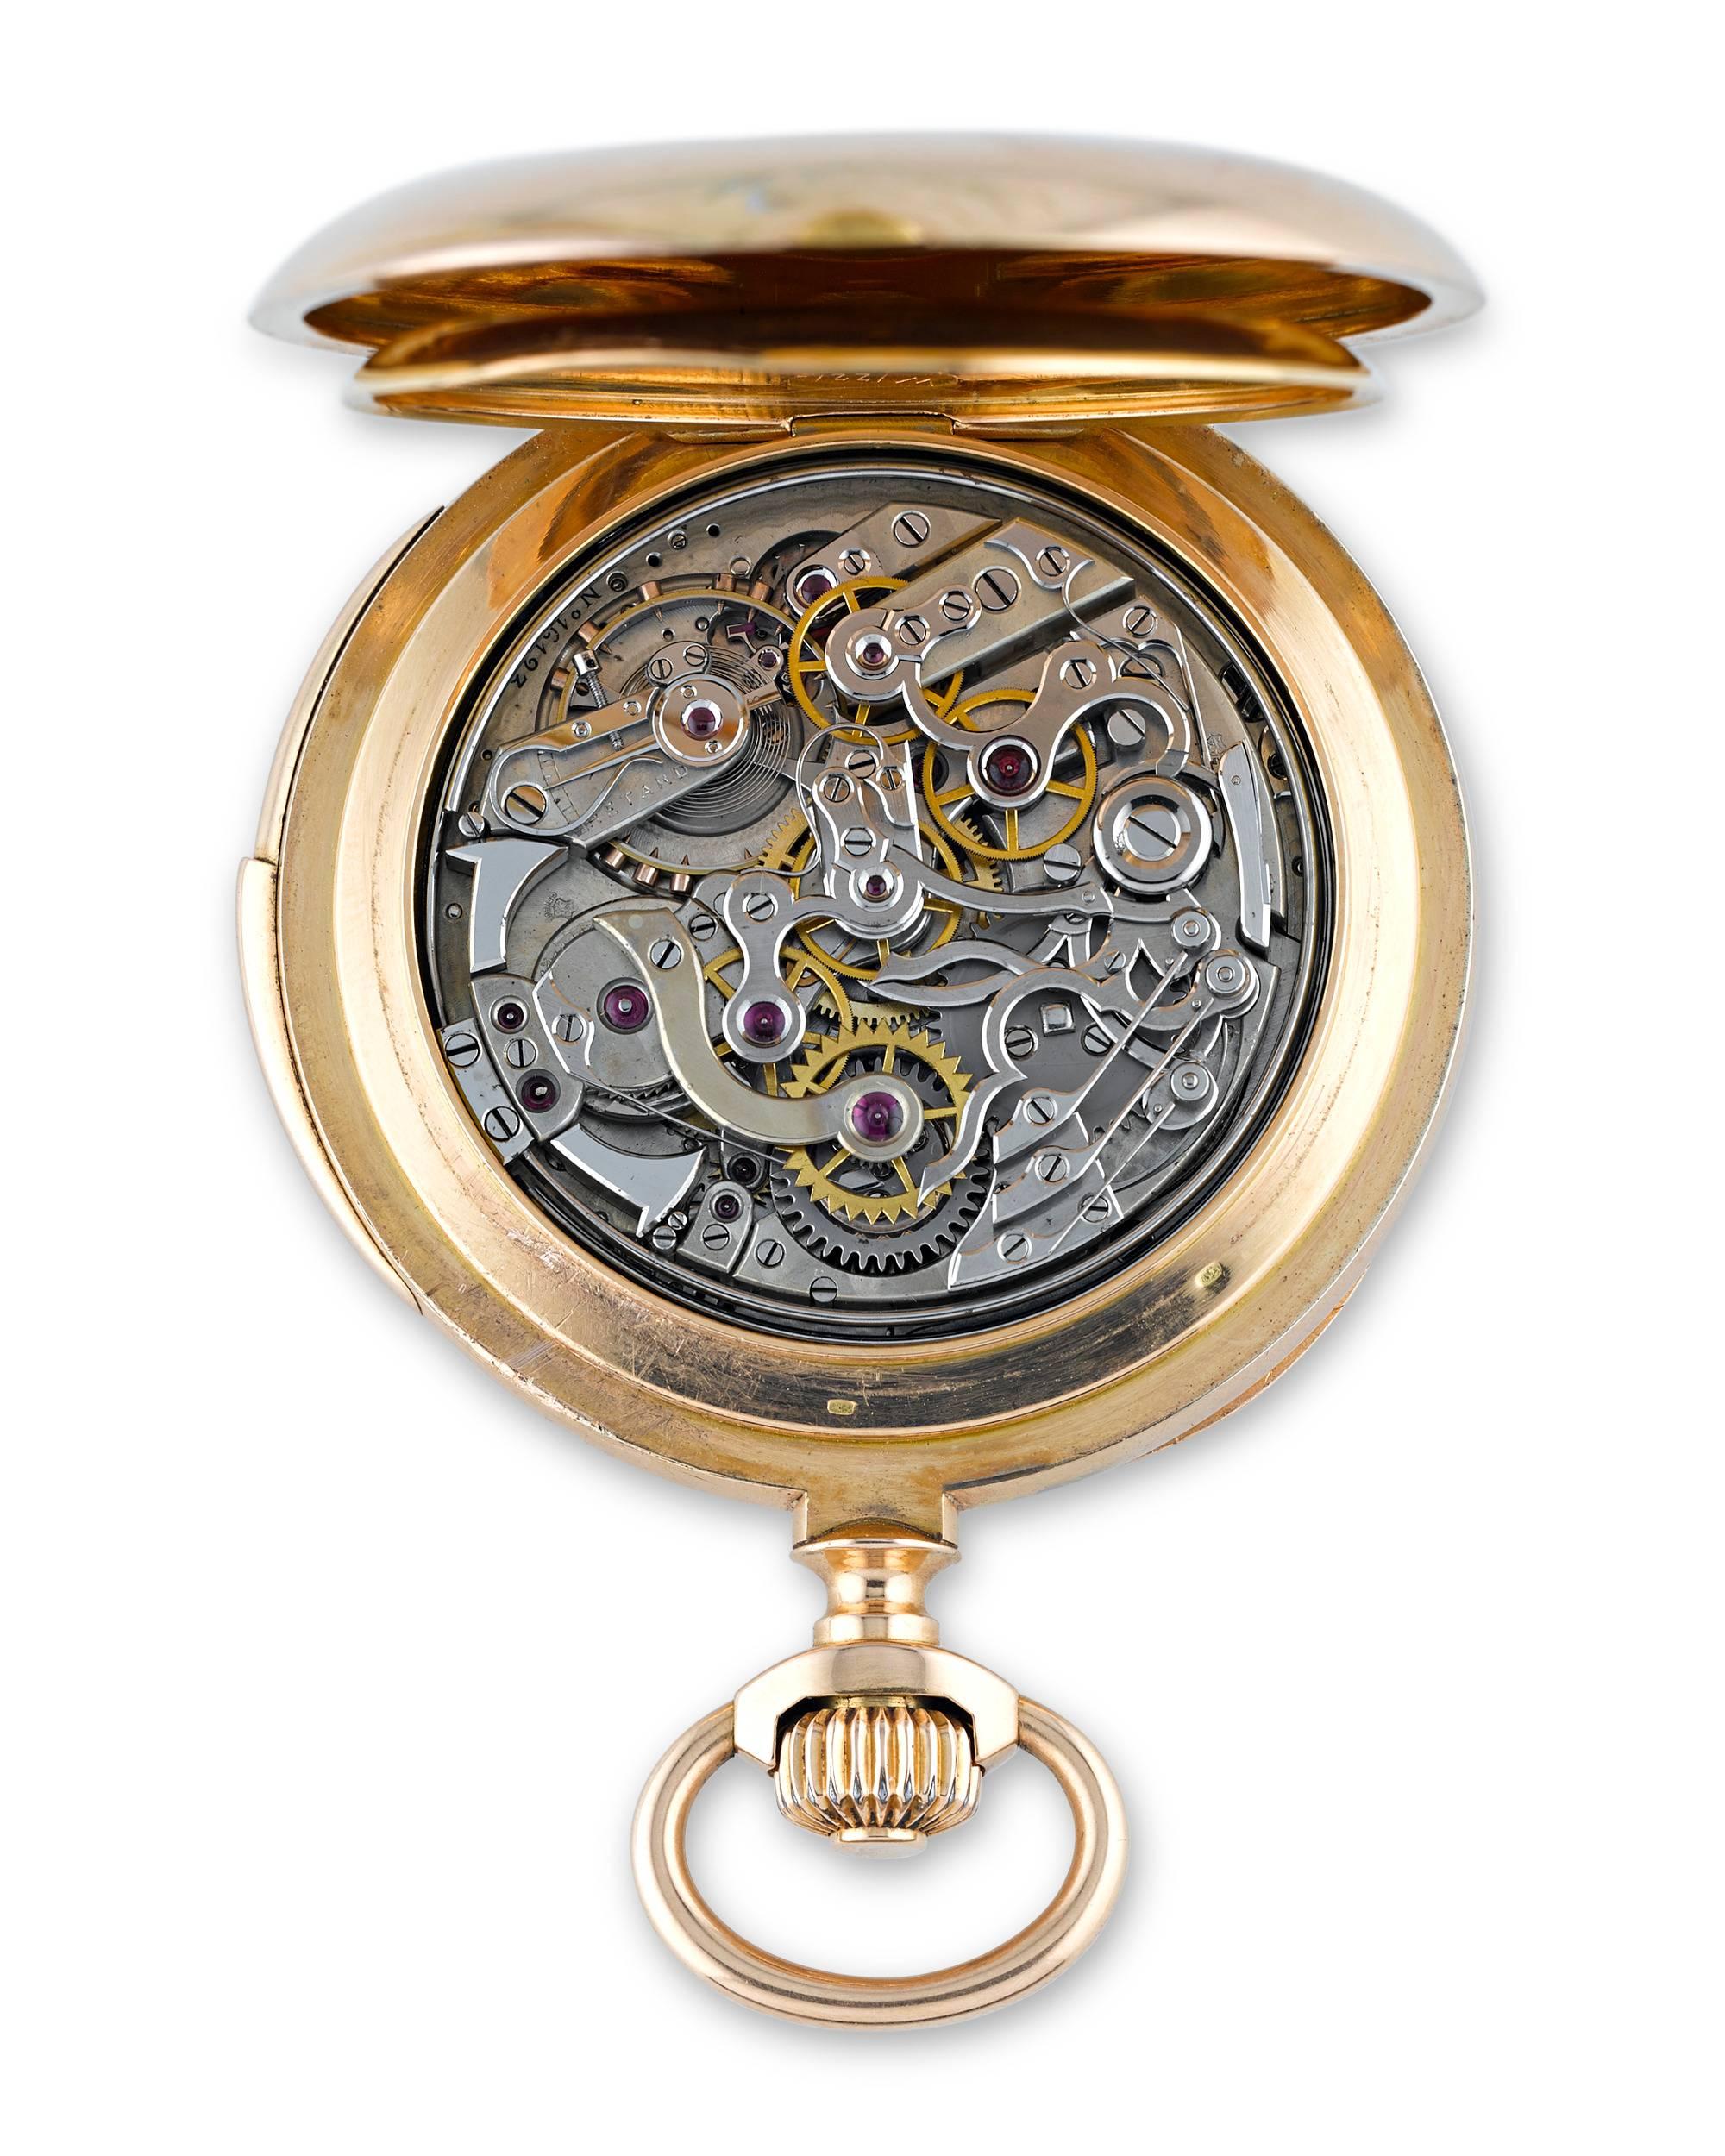 haas neveux pocket watch